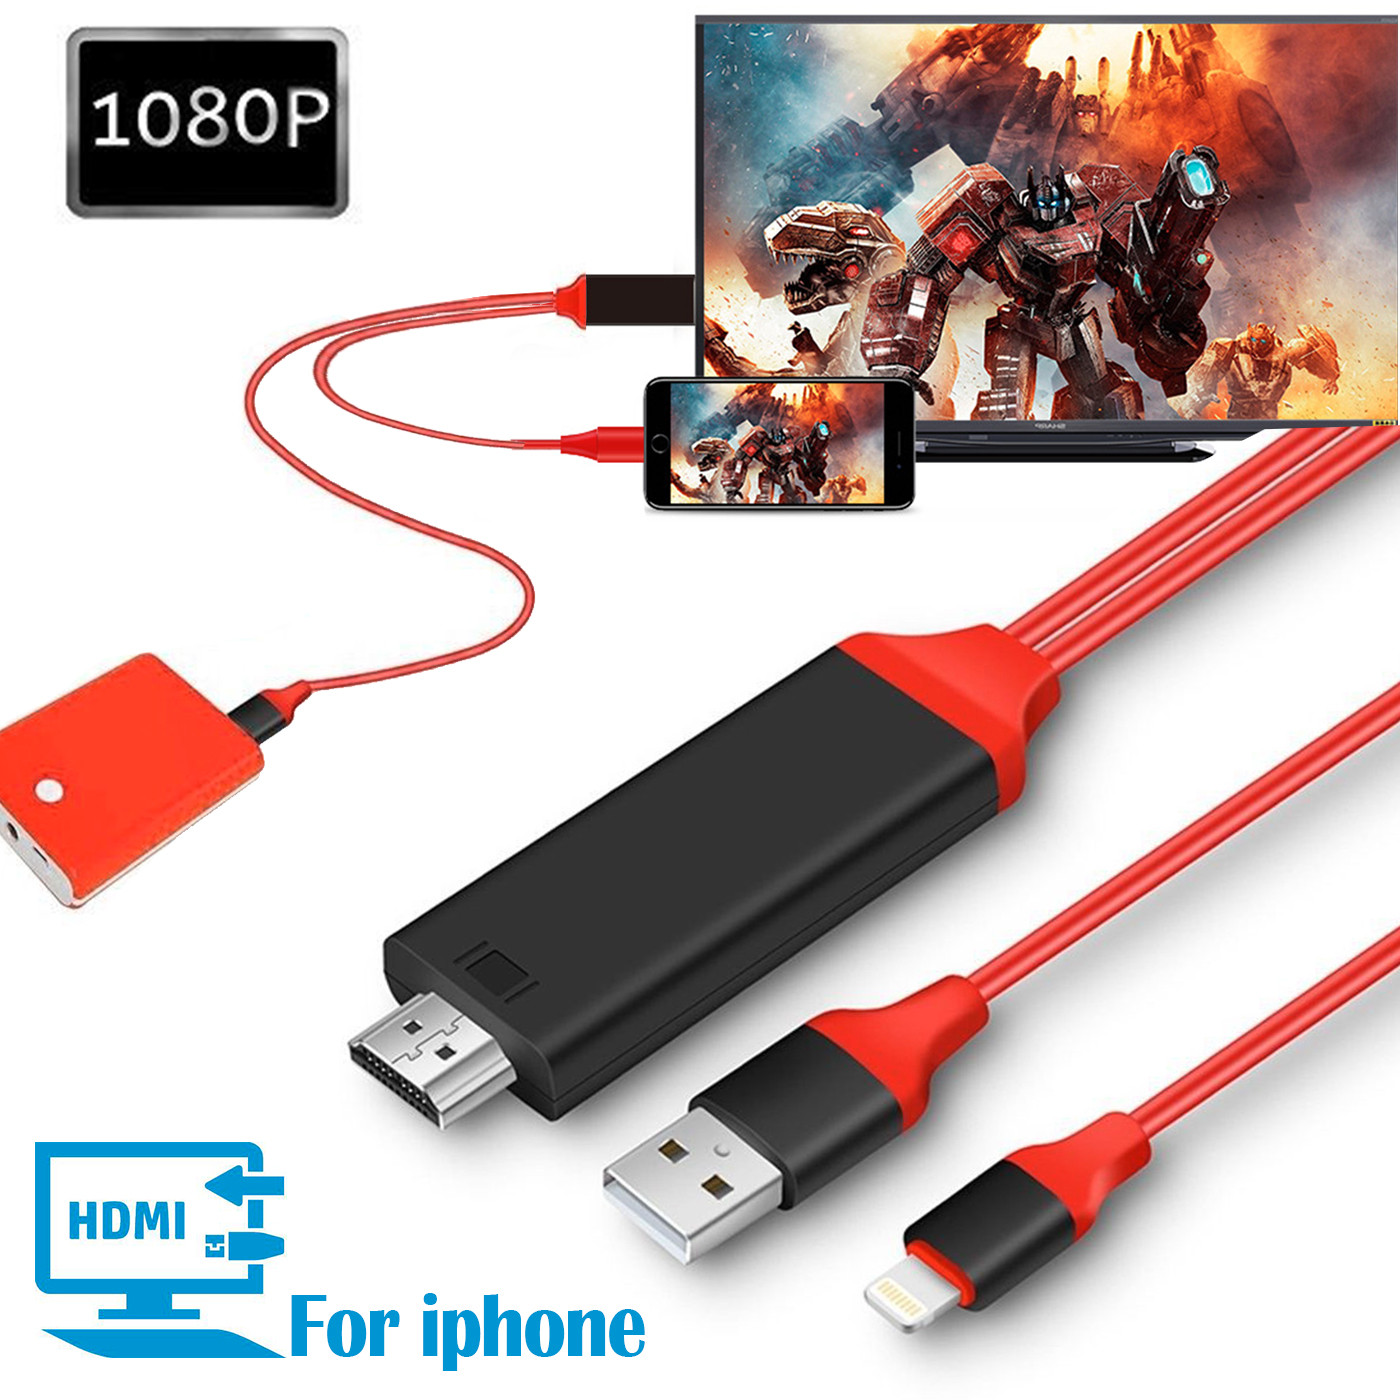 Compatible with iPhone iPad to HDMI Adapter Cable Apple MFi Certified 6.6ft Lightning to HDMI Adapter Cable Black 1080P Digital AV Adapter HDTV Cable for iPhone//iPad to TV Projector Monitor